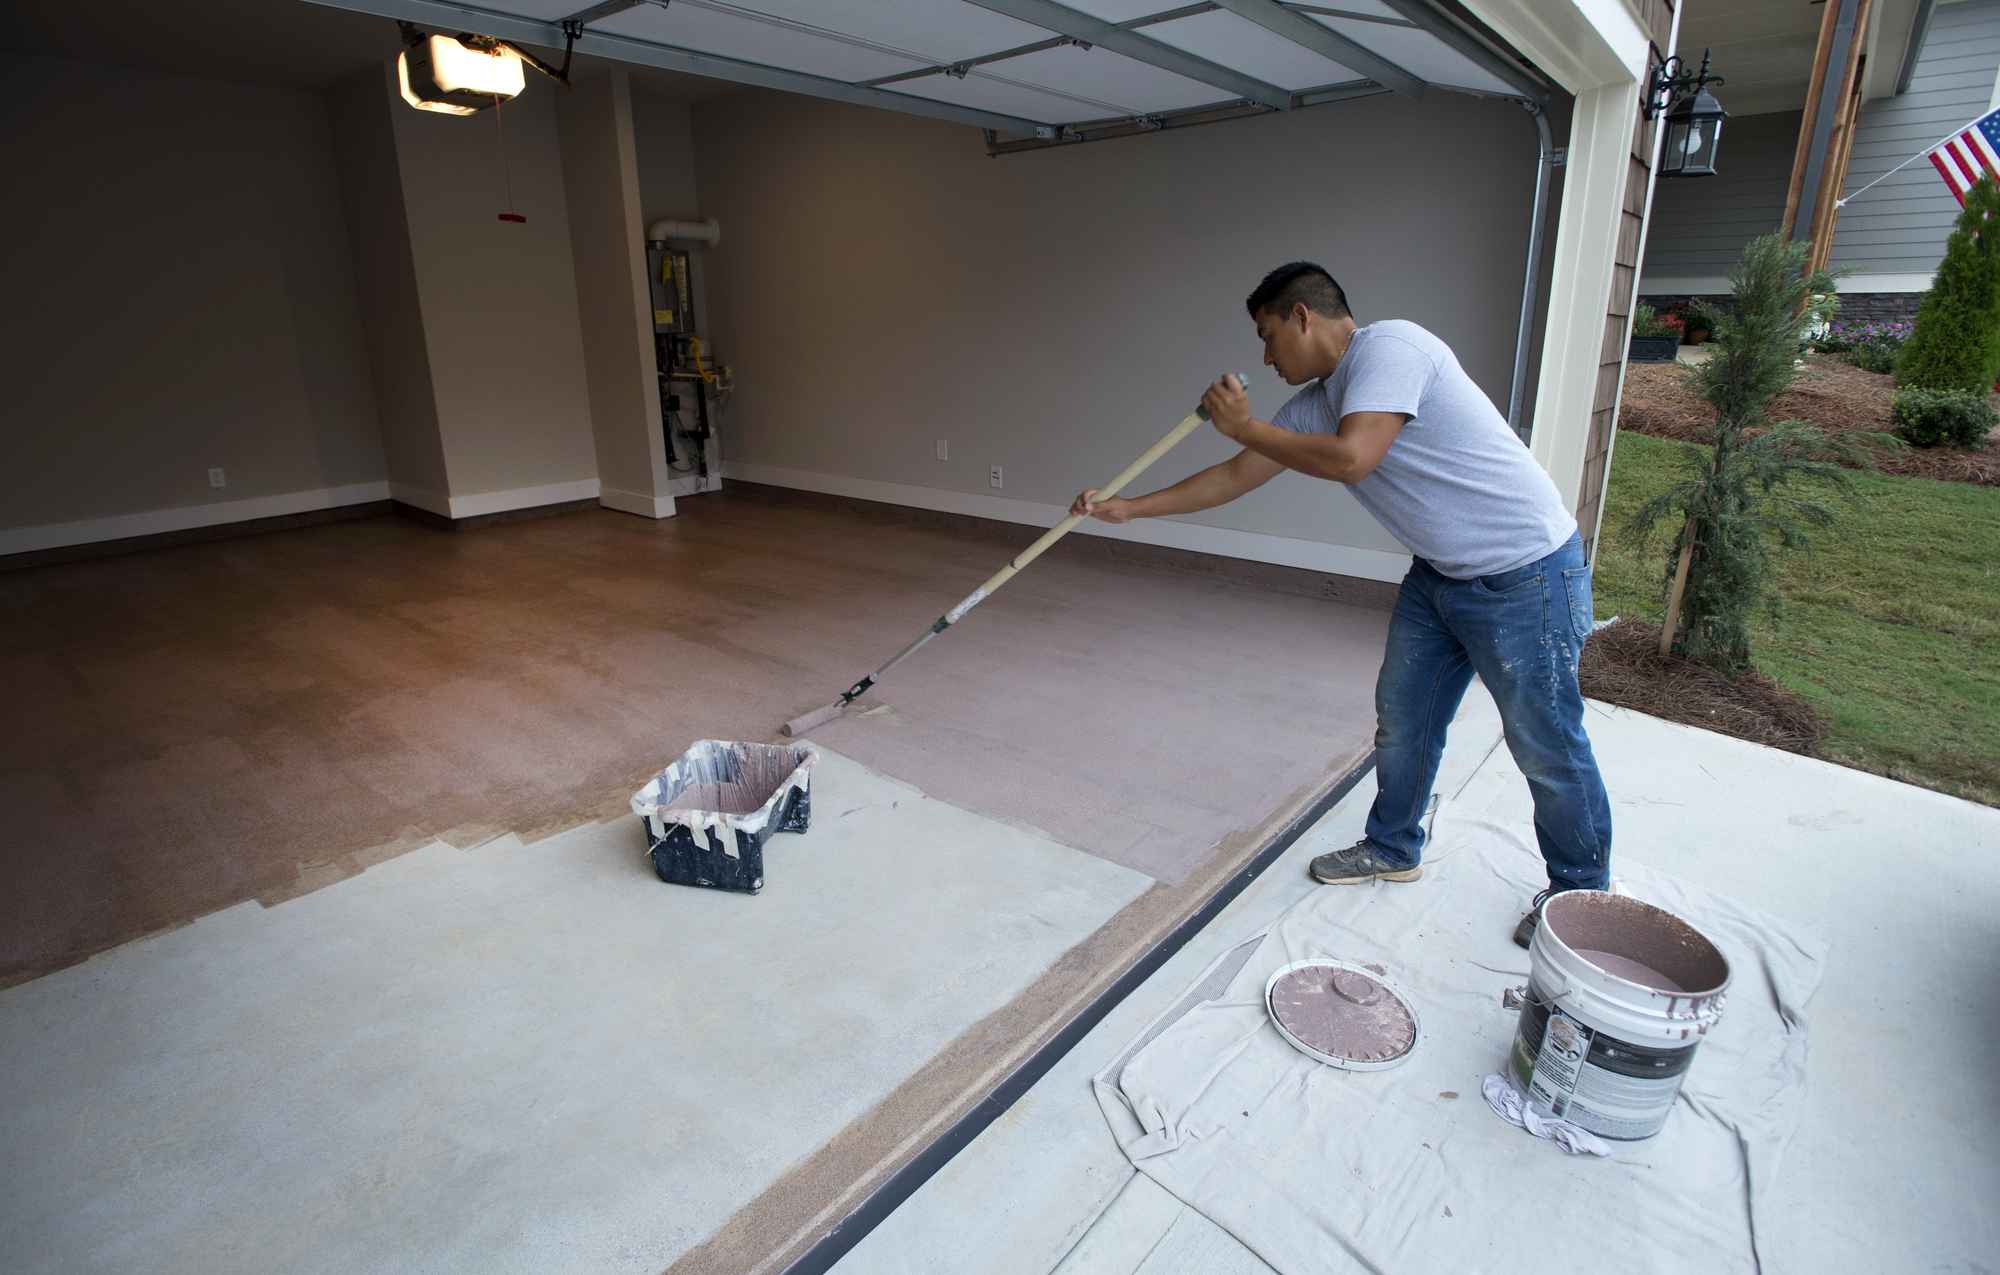 a person coating floor with mop.